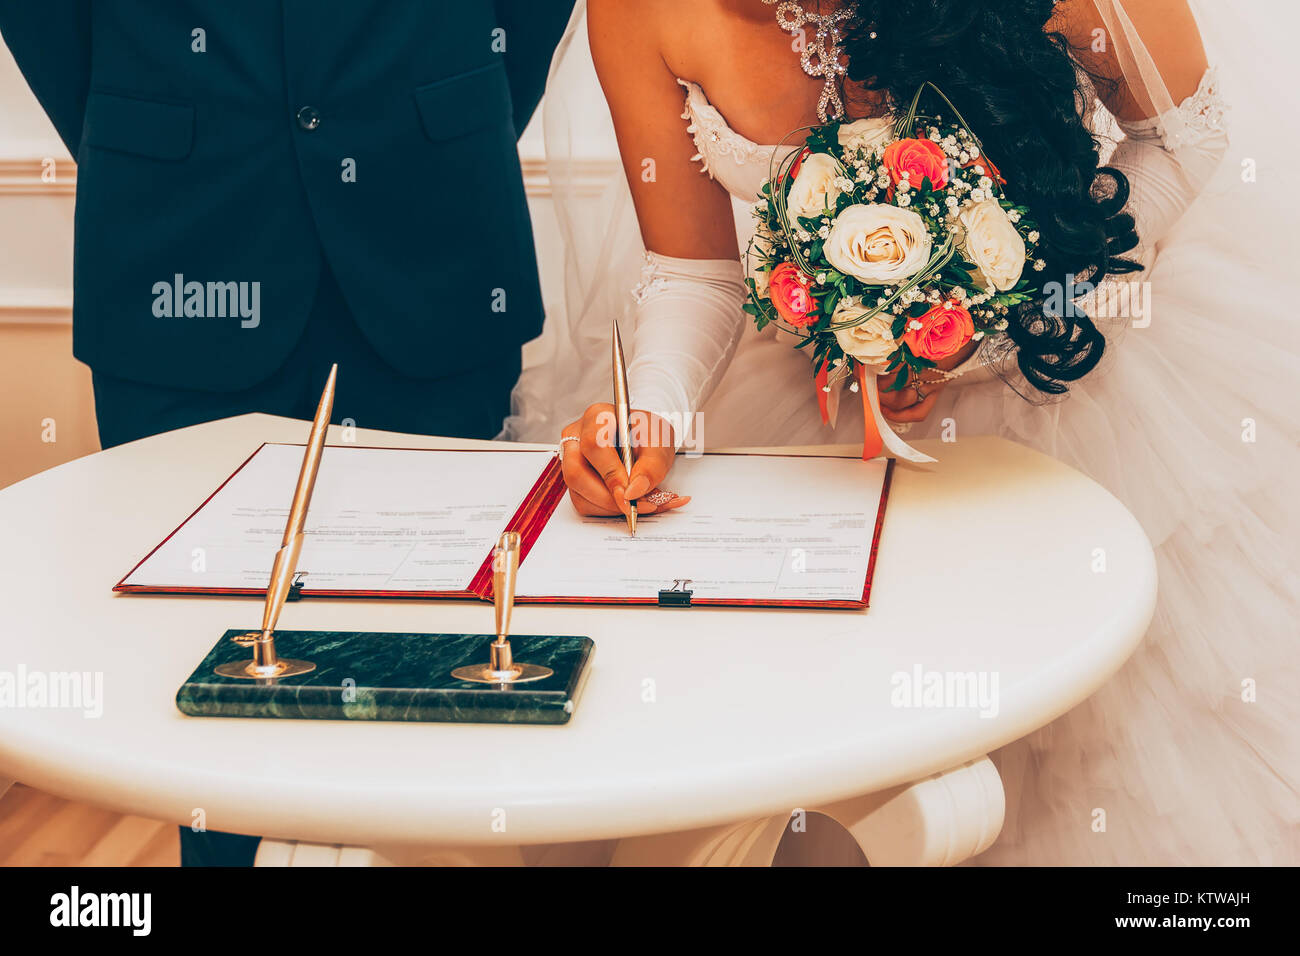 Wedding. Registration Of Marriage, The Bride With A Bouquet Of Flowers Signed A Marriage Contract A Golden Pen, Selective Focus. Tinted Image Stock Photo